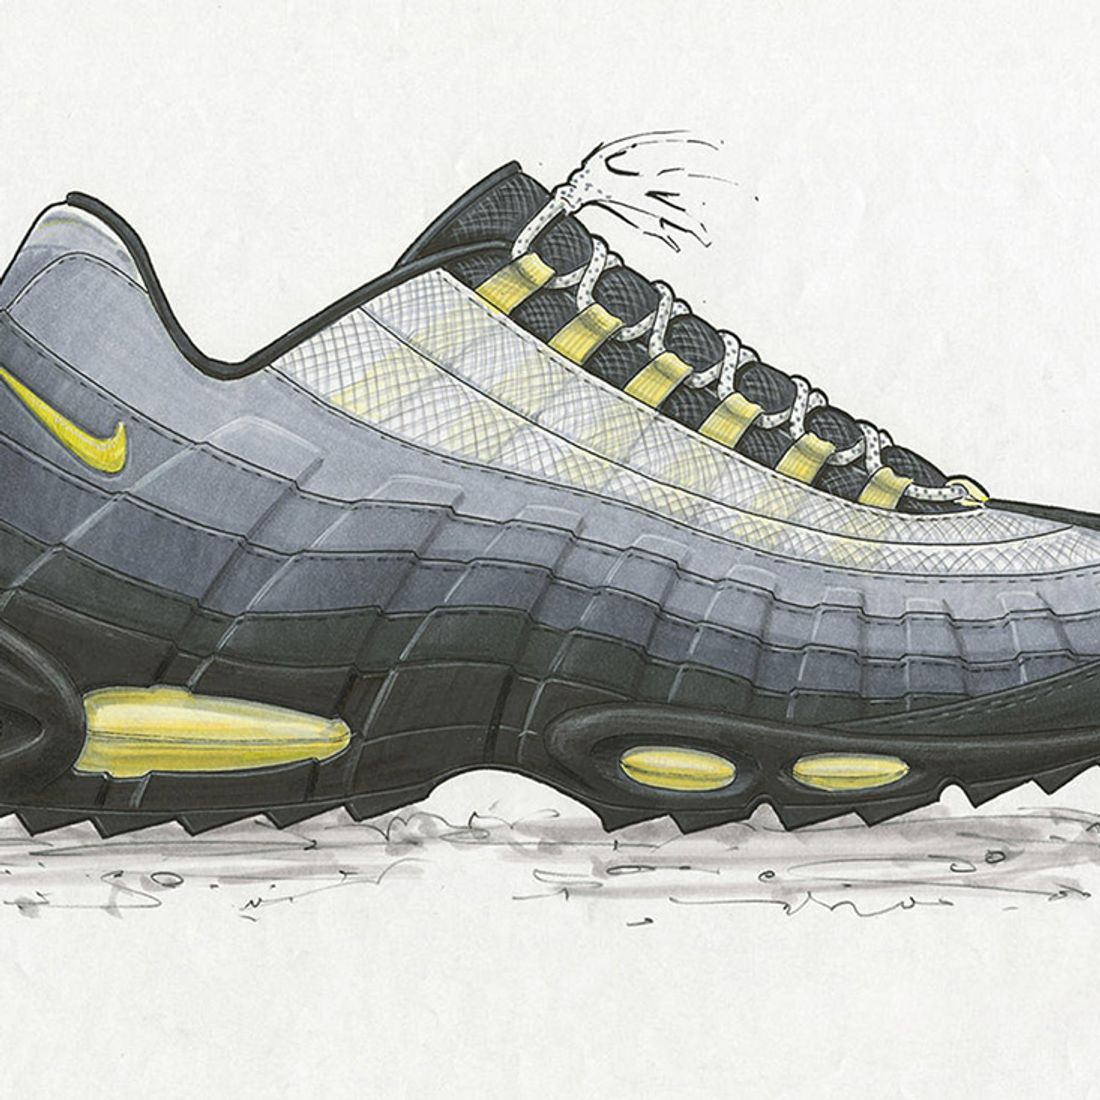 jueves Grave superstición The All-Time Greatest Nike Air Max 95s: Part 2 - Sneaker Freaker